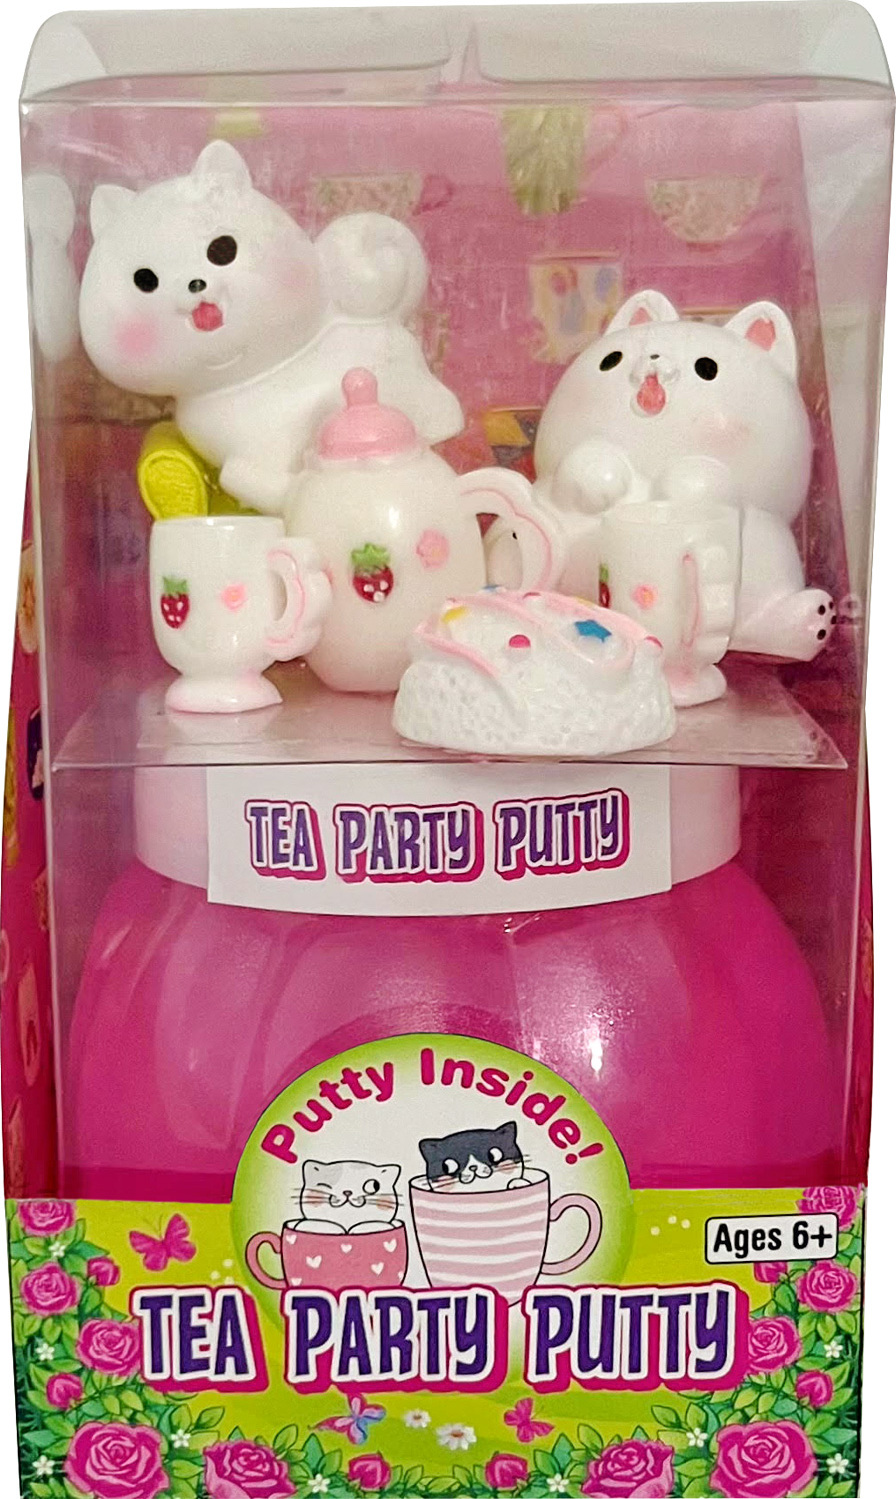 Tea Party Putty